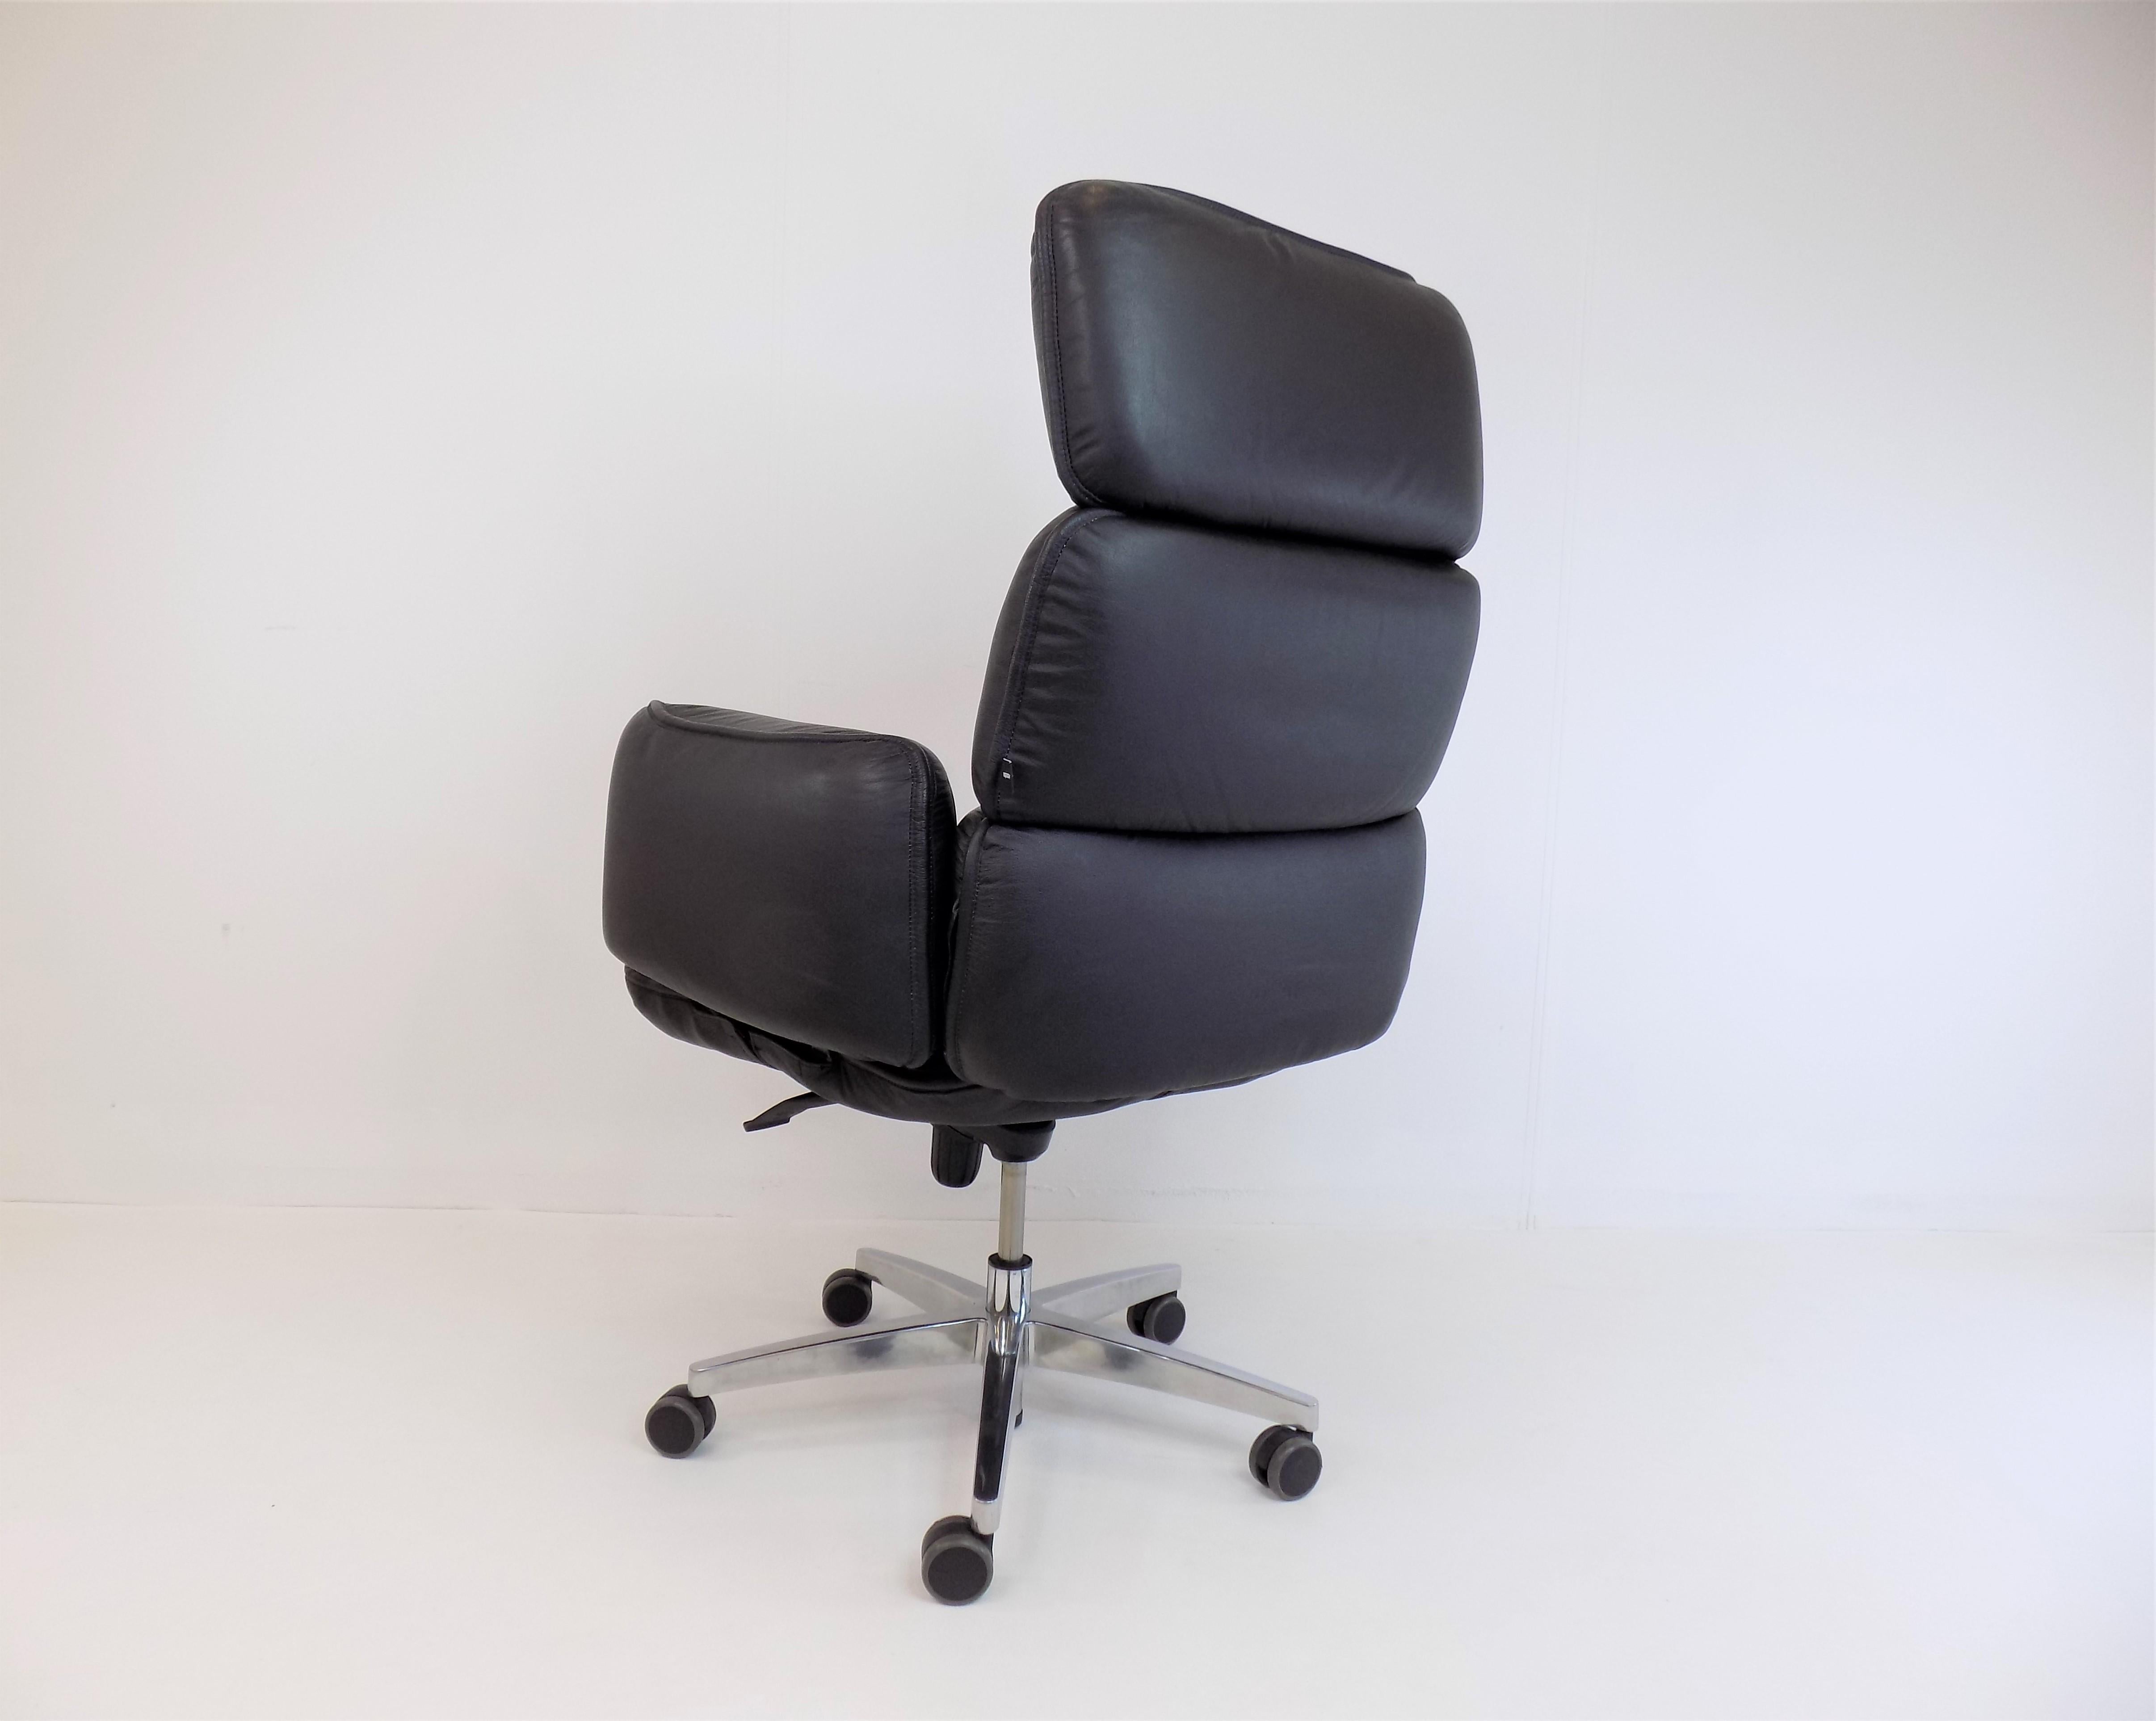 This topstar office chair, finished in black nappa leather, is in excellent condition. The leather shows the most minimal signs of wear, the chrome-plated base has virtually no scratches. The rocker function, as well as the stepless height lock,